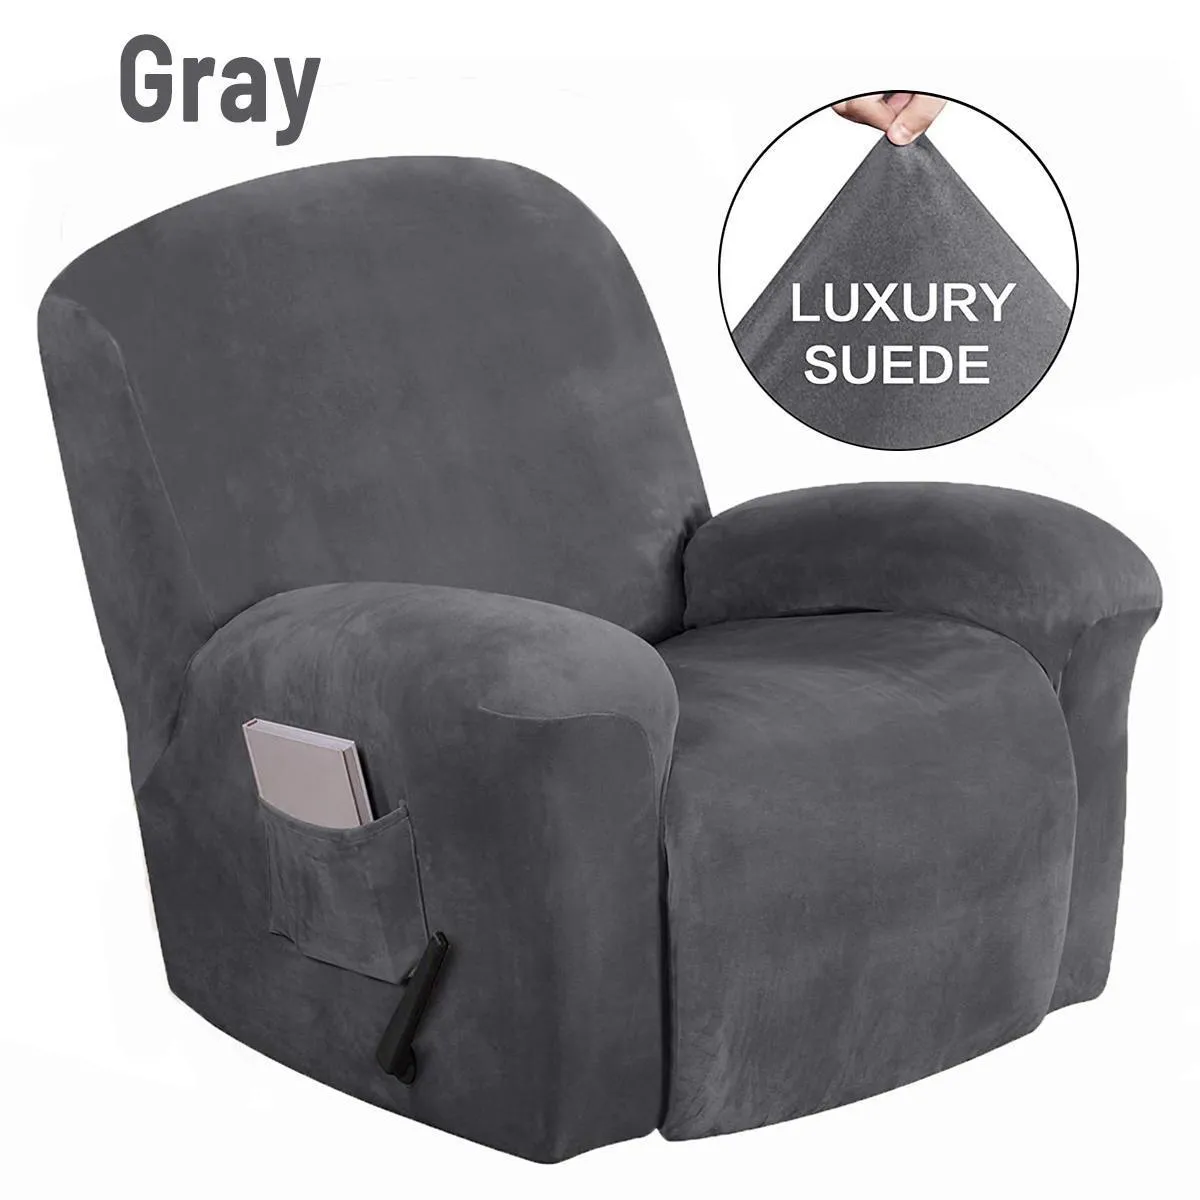 Suede All-inclusive Recliner Chair Cover Stretch Chair Waterproof Non-slip Slipcover Dustproof Massage Sofa Chair Seat Protector 2198J